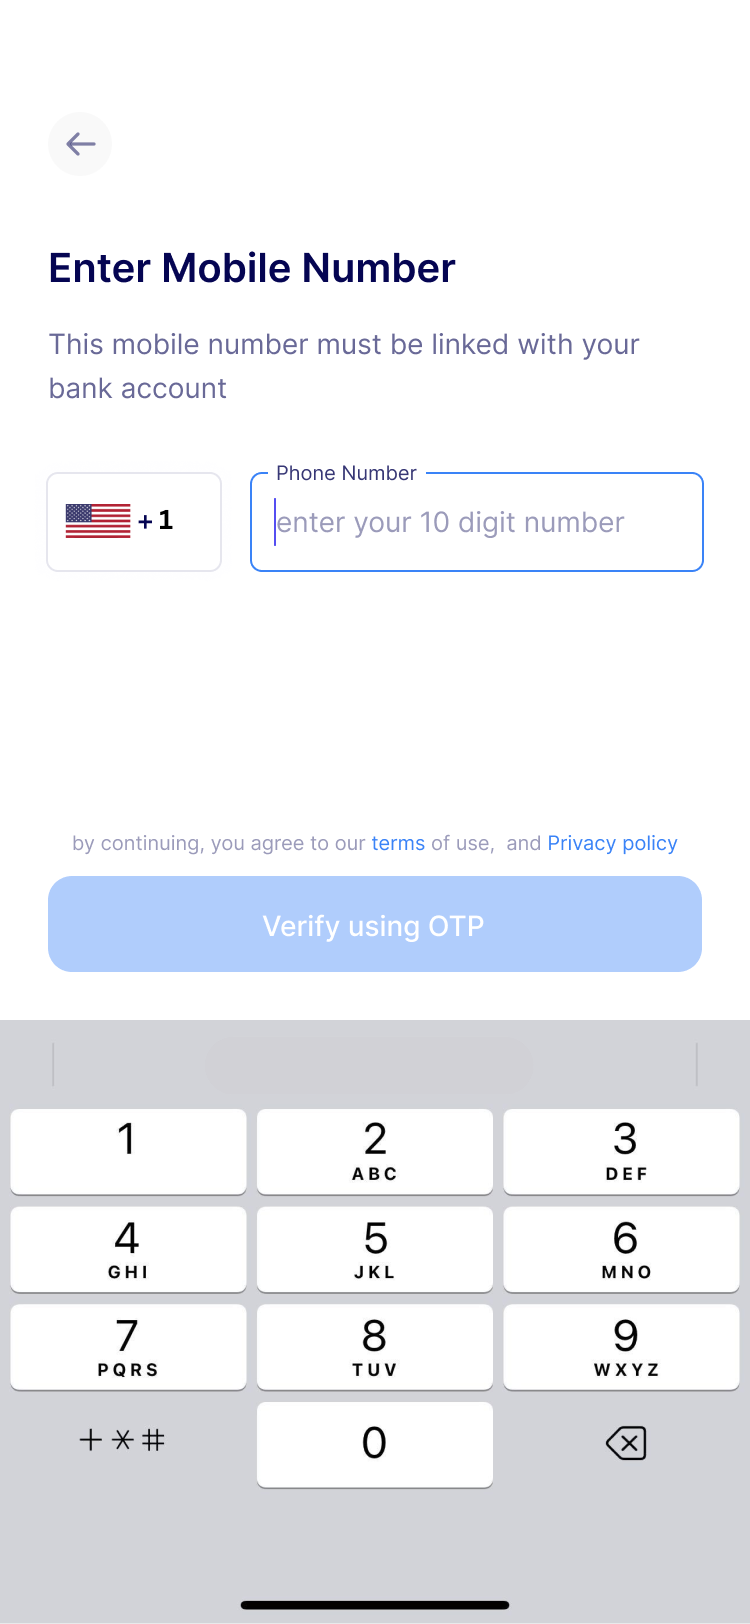 Multifactor authentication with phone number verification